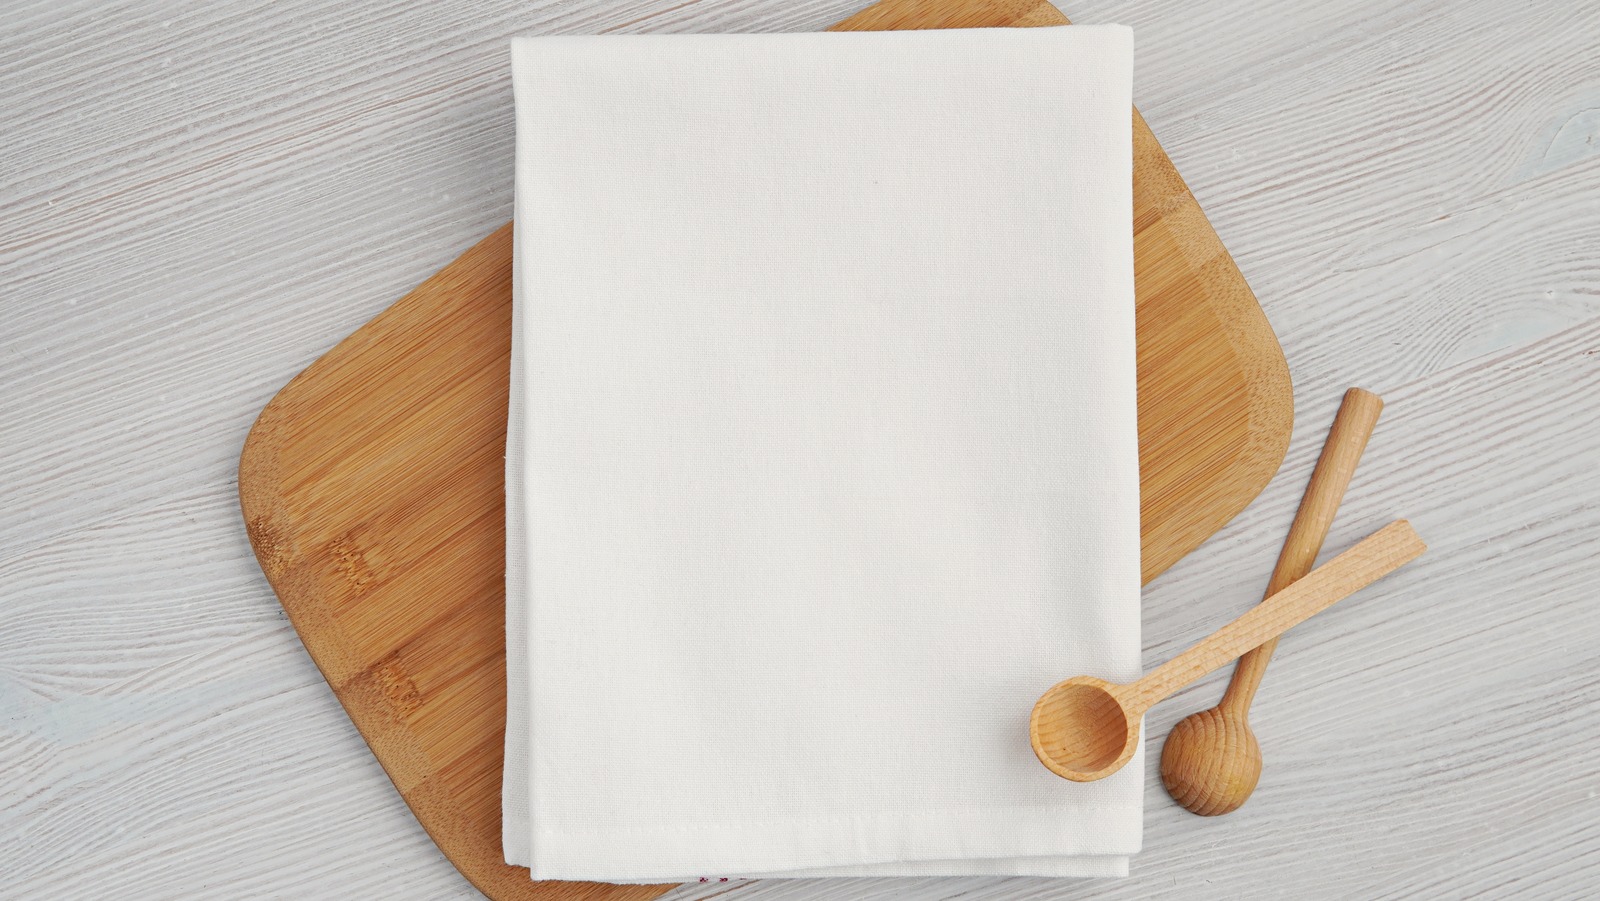 15 Trendy & Neutral Kitchen Towels We Are Obsessed With - By